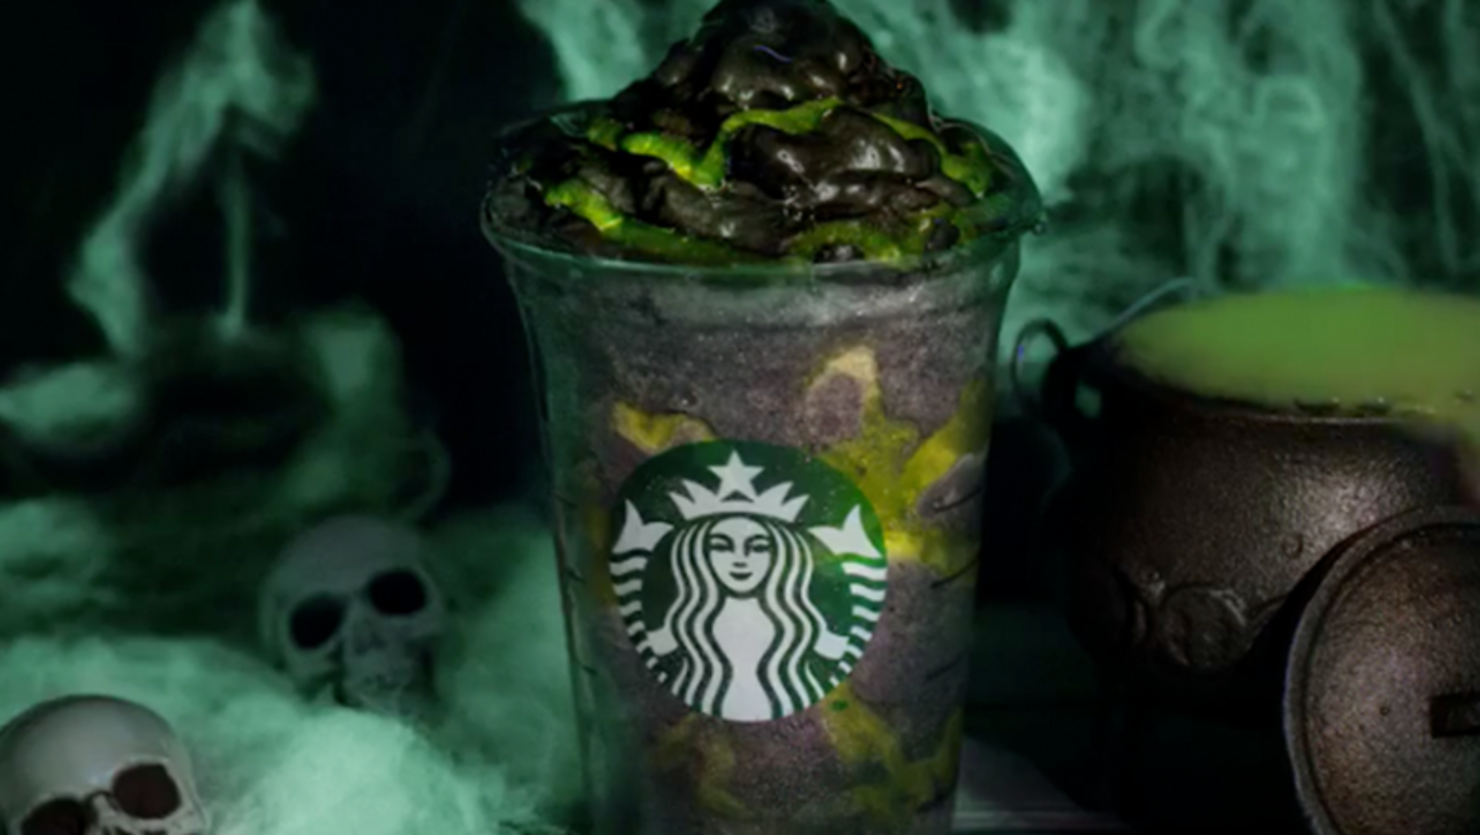 Starbucks Has A Phantom Frappuccino Made With Charcoal Powder & Green